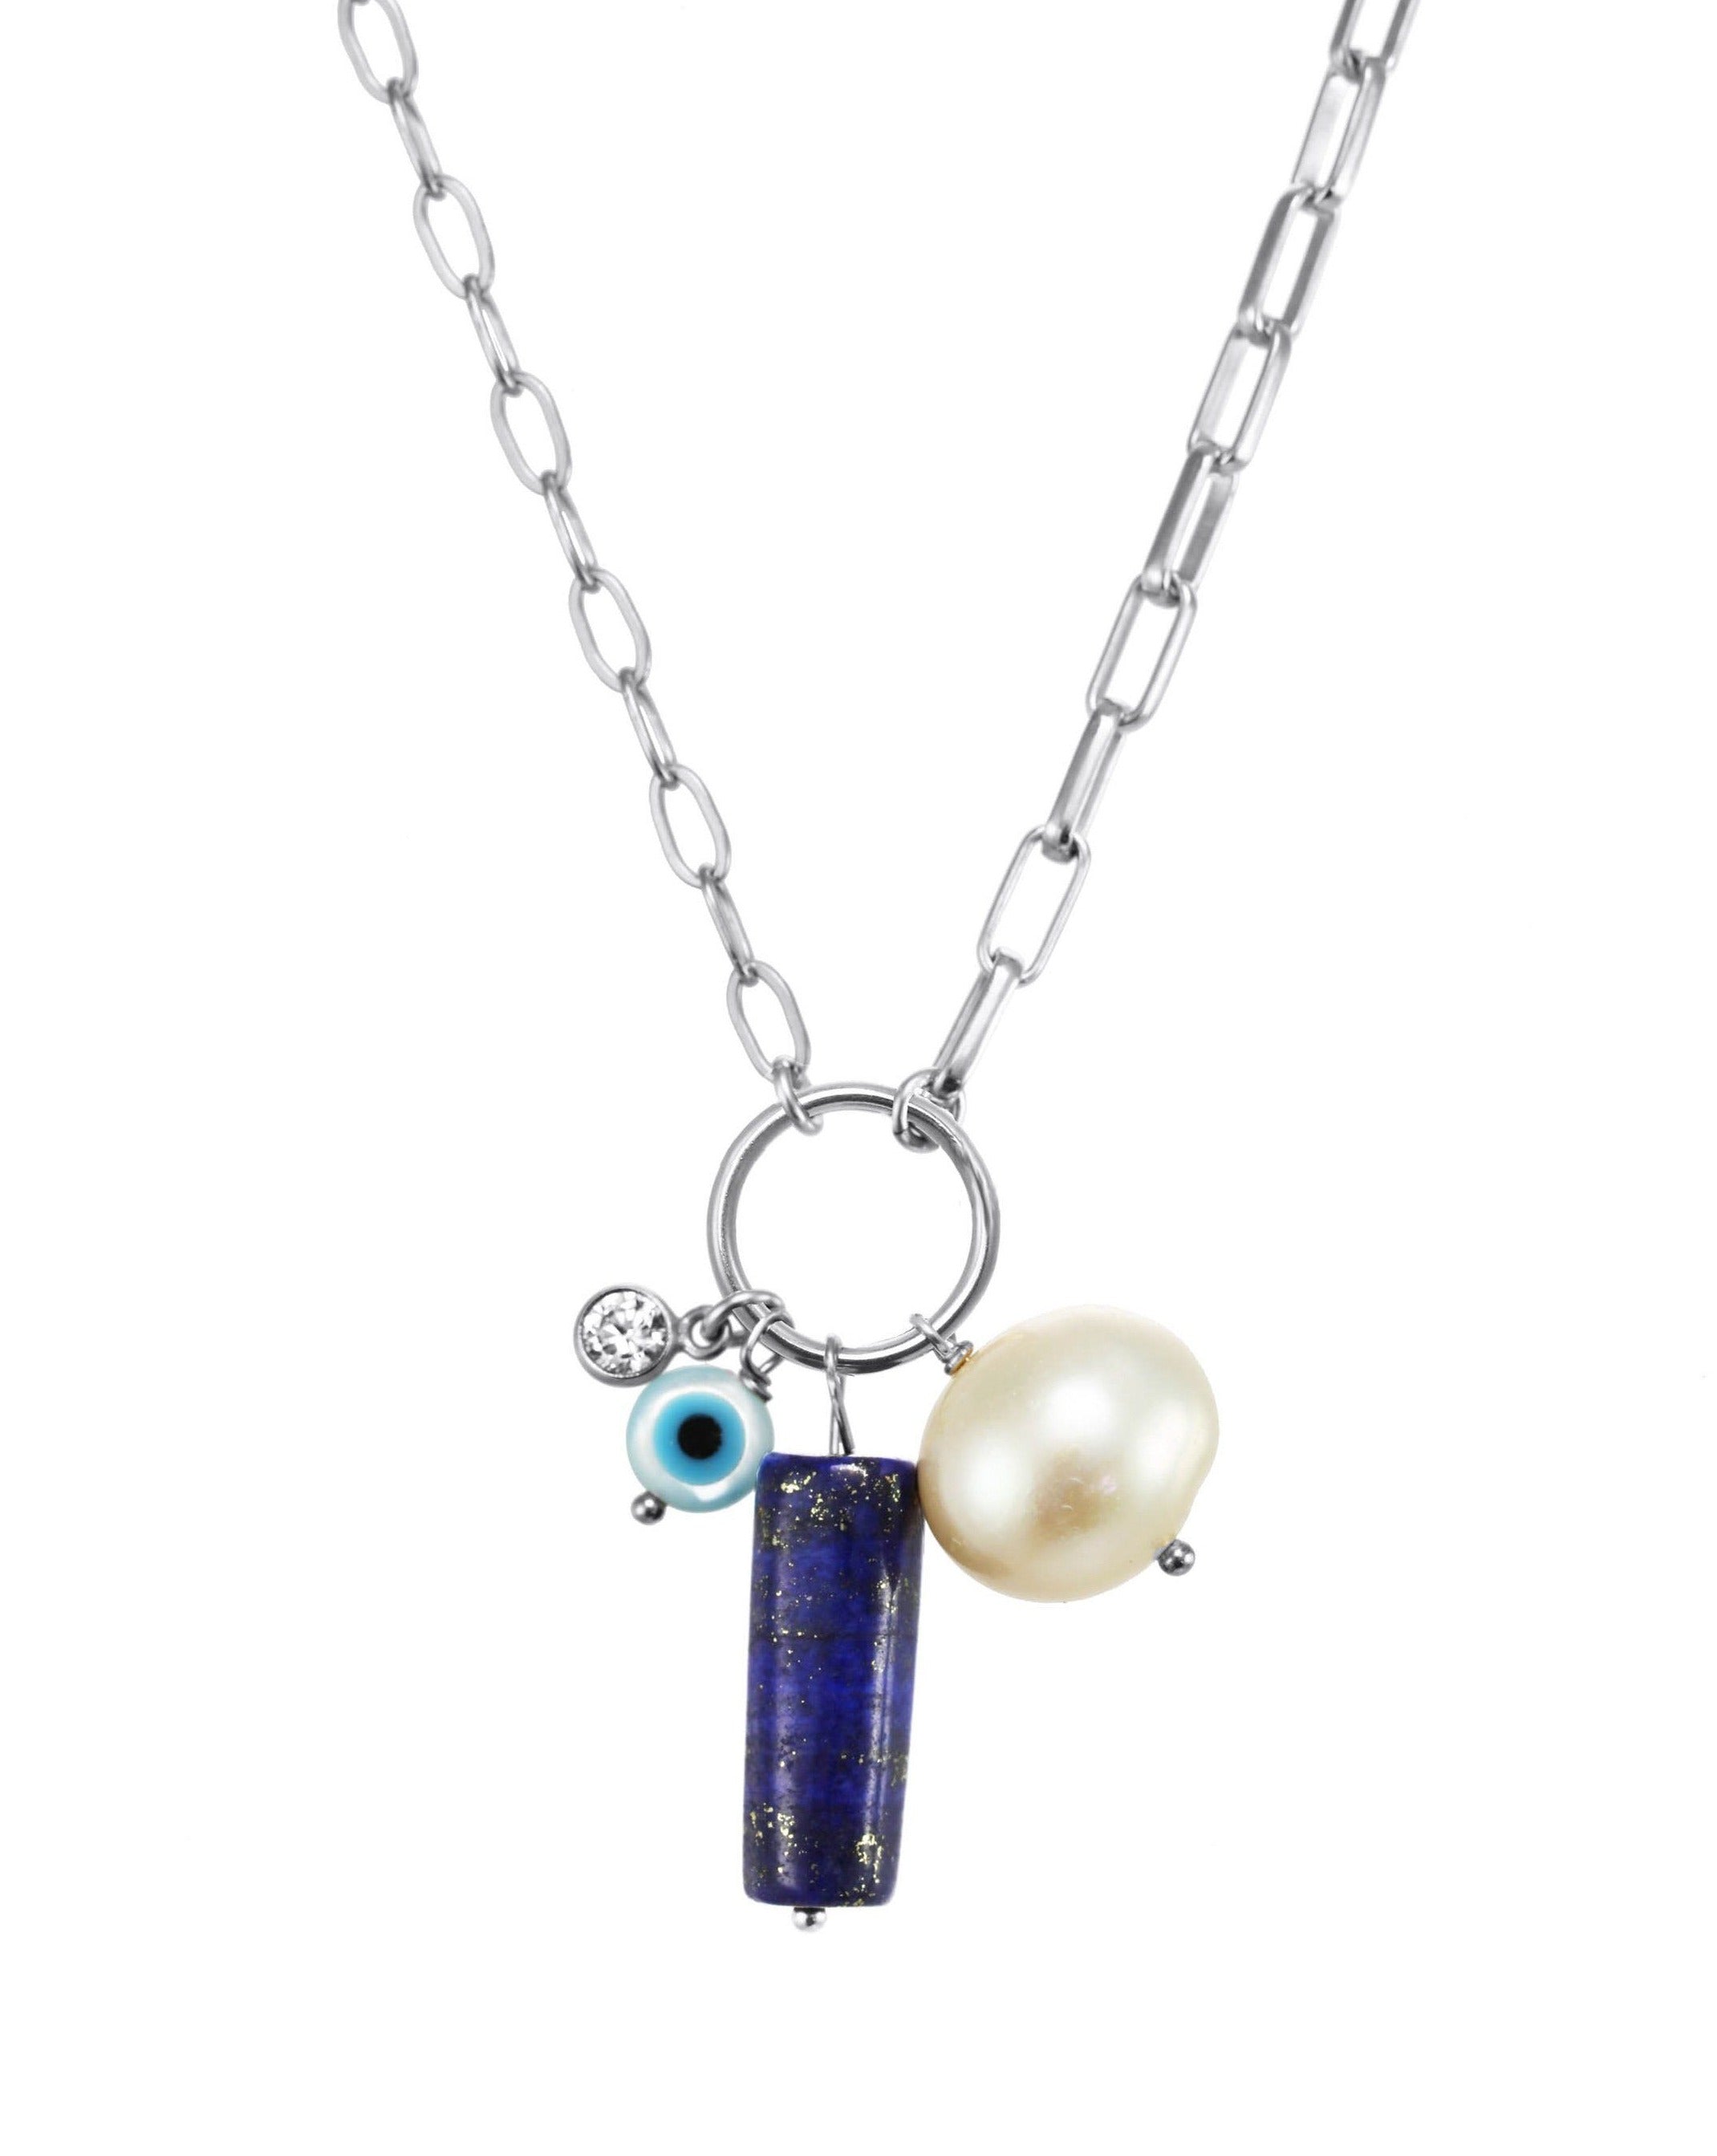 Lucky Necklace by KOZAKH. A 16 to 18 inch adjustable length necklace with flat link chain on one half and mini paperclip chain on the other half, crafted in Sterling Silver, featuring a cylindrical Lapis, a round Freshwater Pearl, and a hand carved Mother of Pearl Evil Eye.